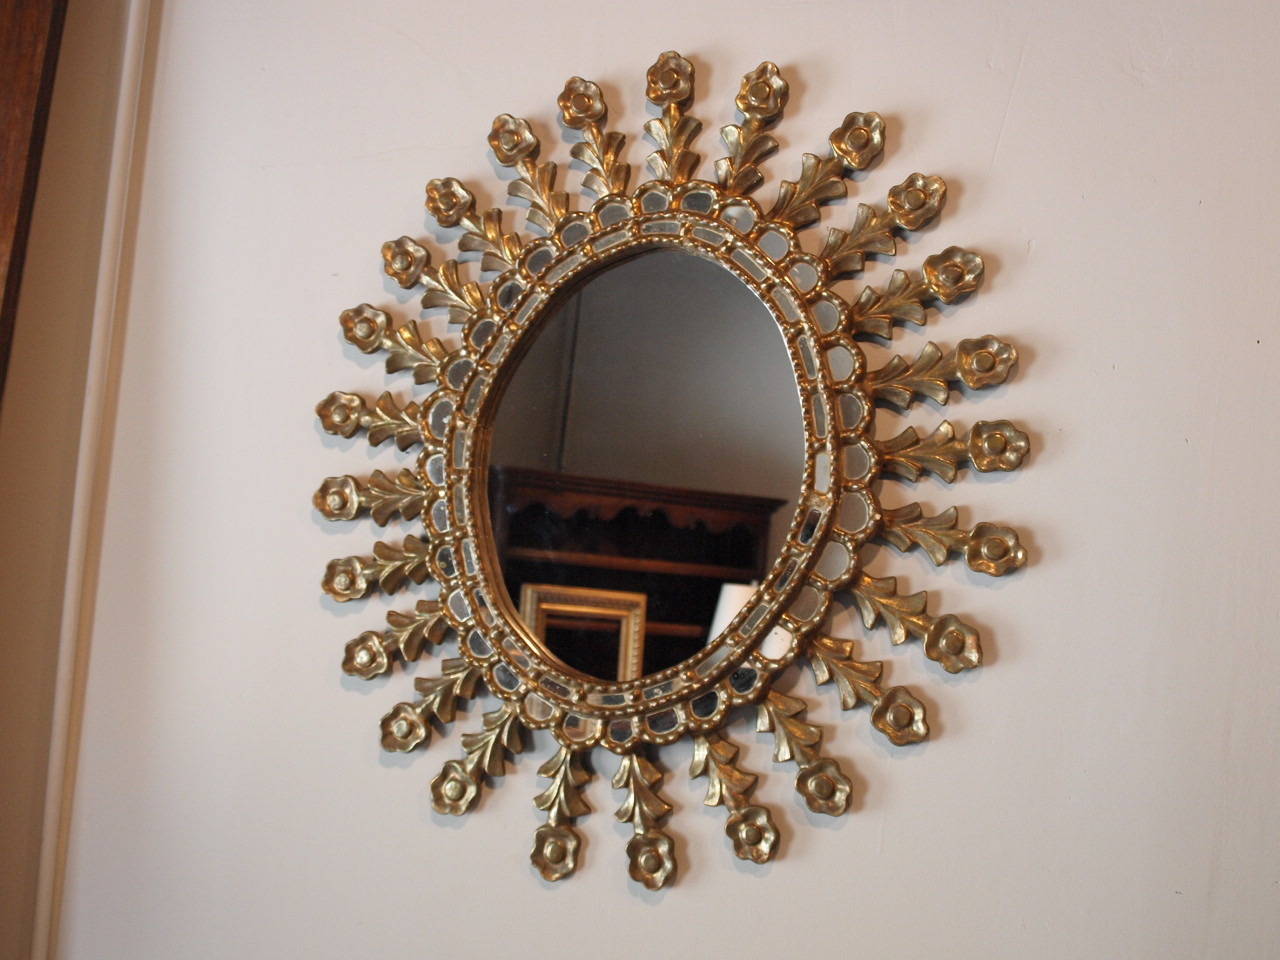 Early 20th century Italian oval Sunburst mirror, circa 1920.  A wonderful decorative mirror - whether hung alone or as part of a grouping.